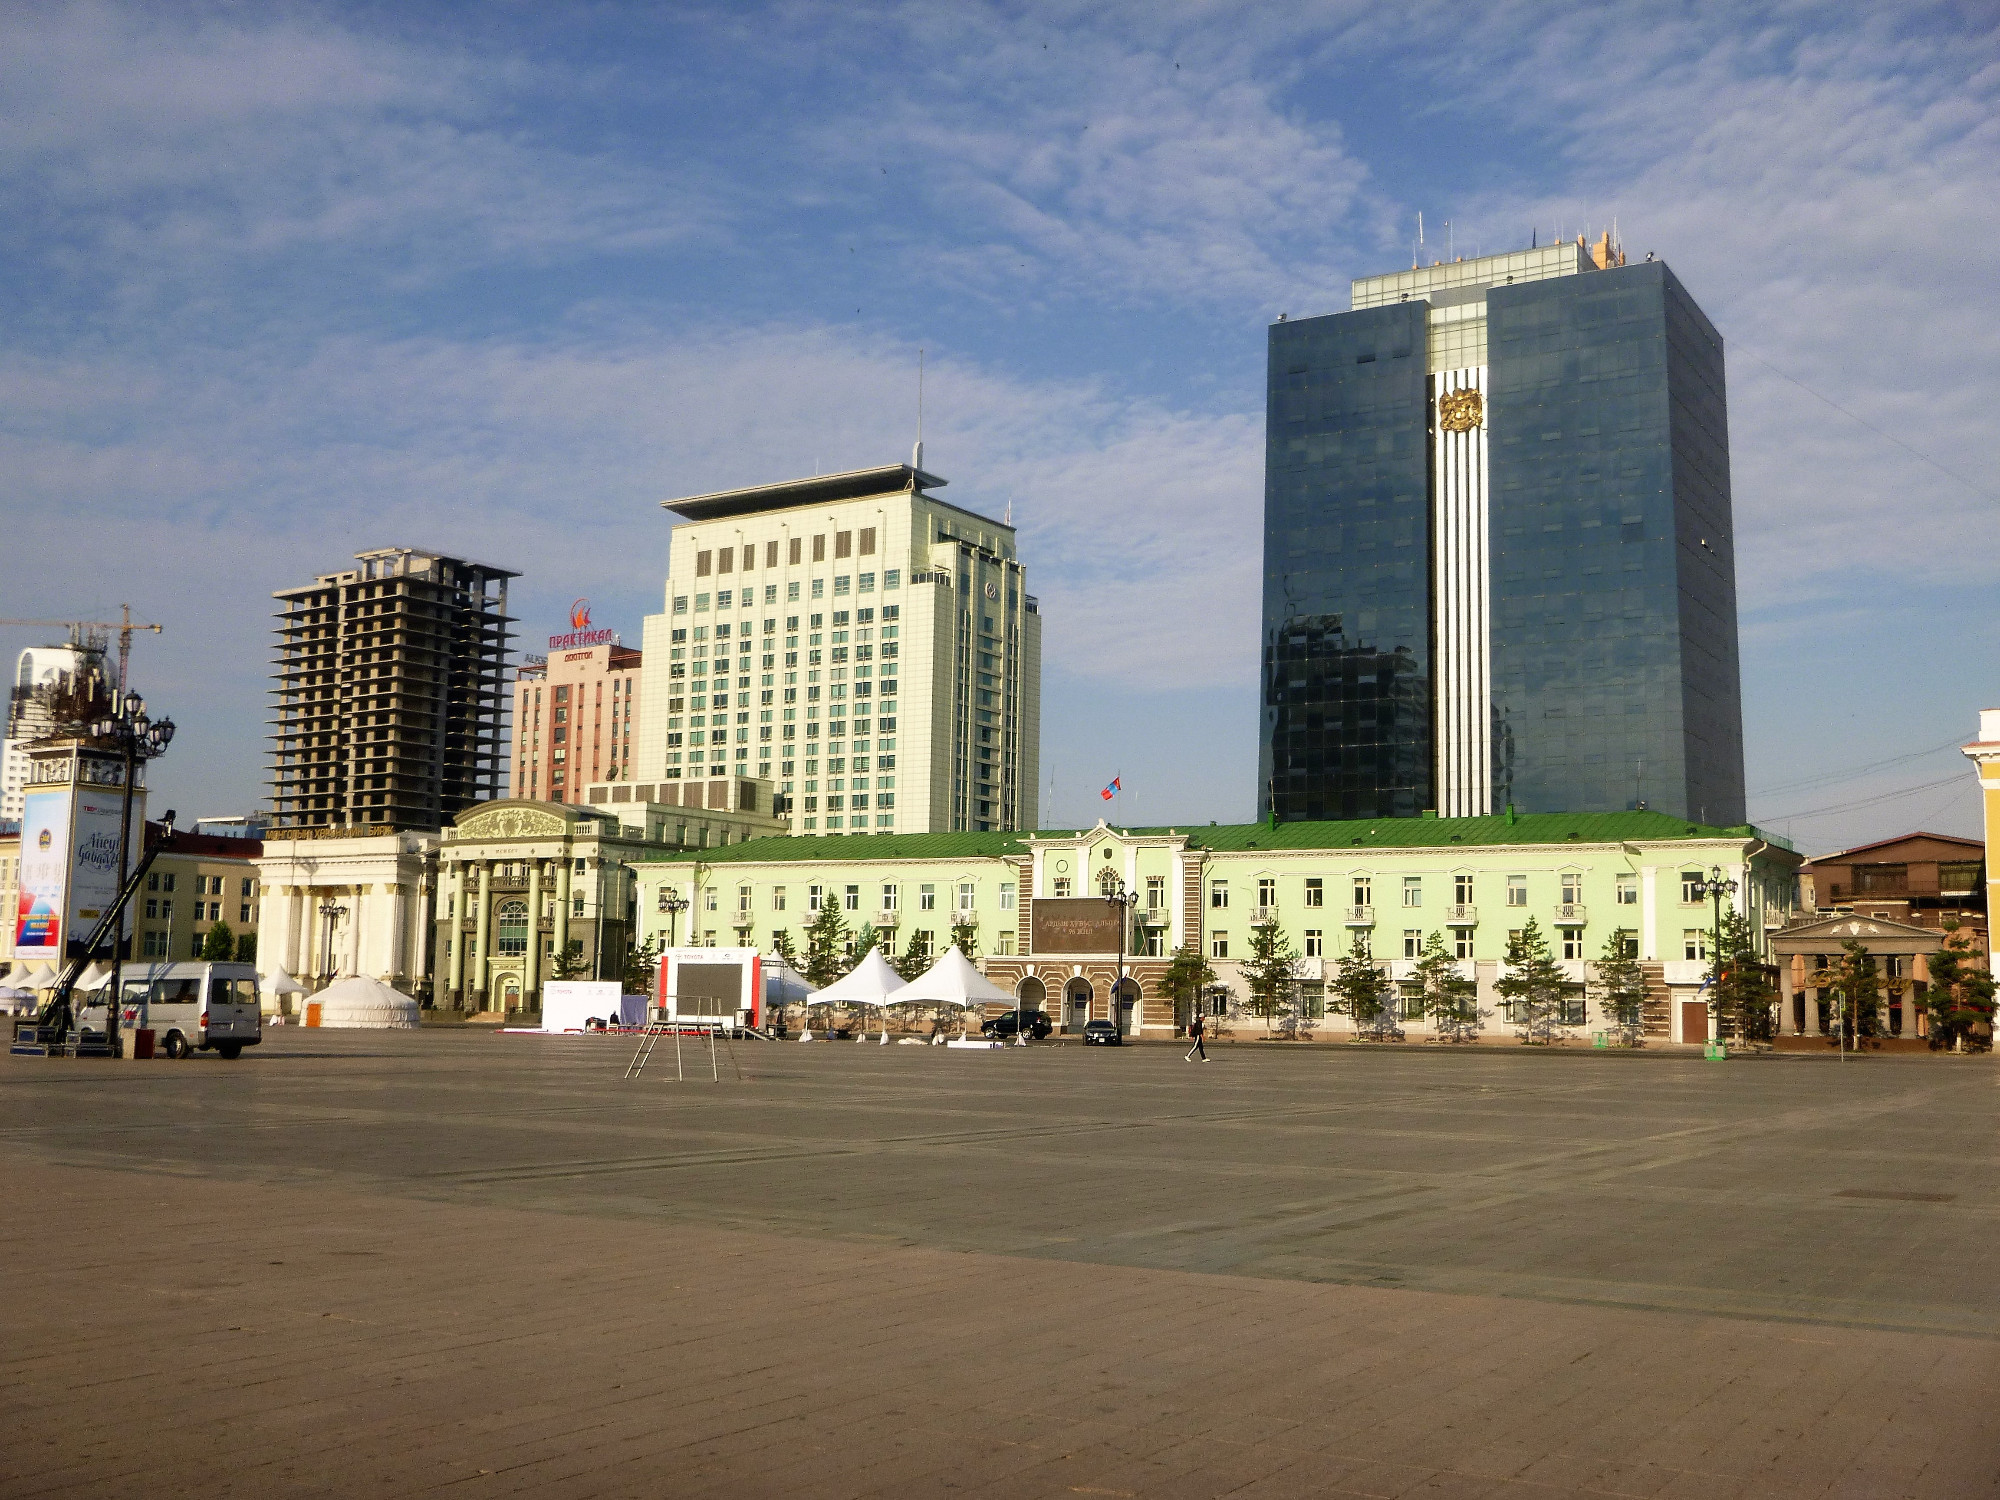 Rear Black Glass Building Khangarid Palace<br/>
Forefront Ulaanbaatar city governent office